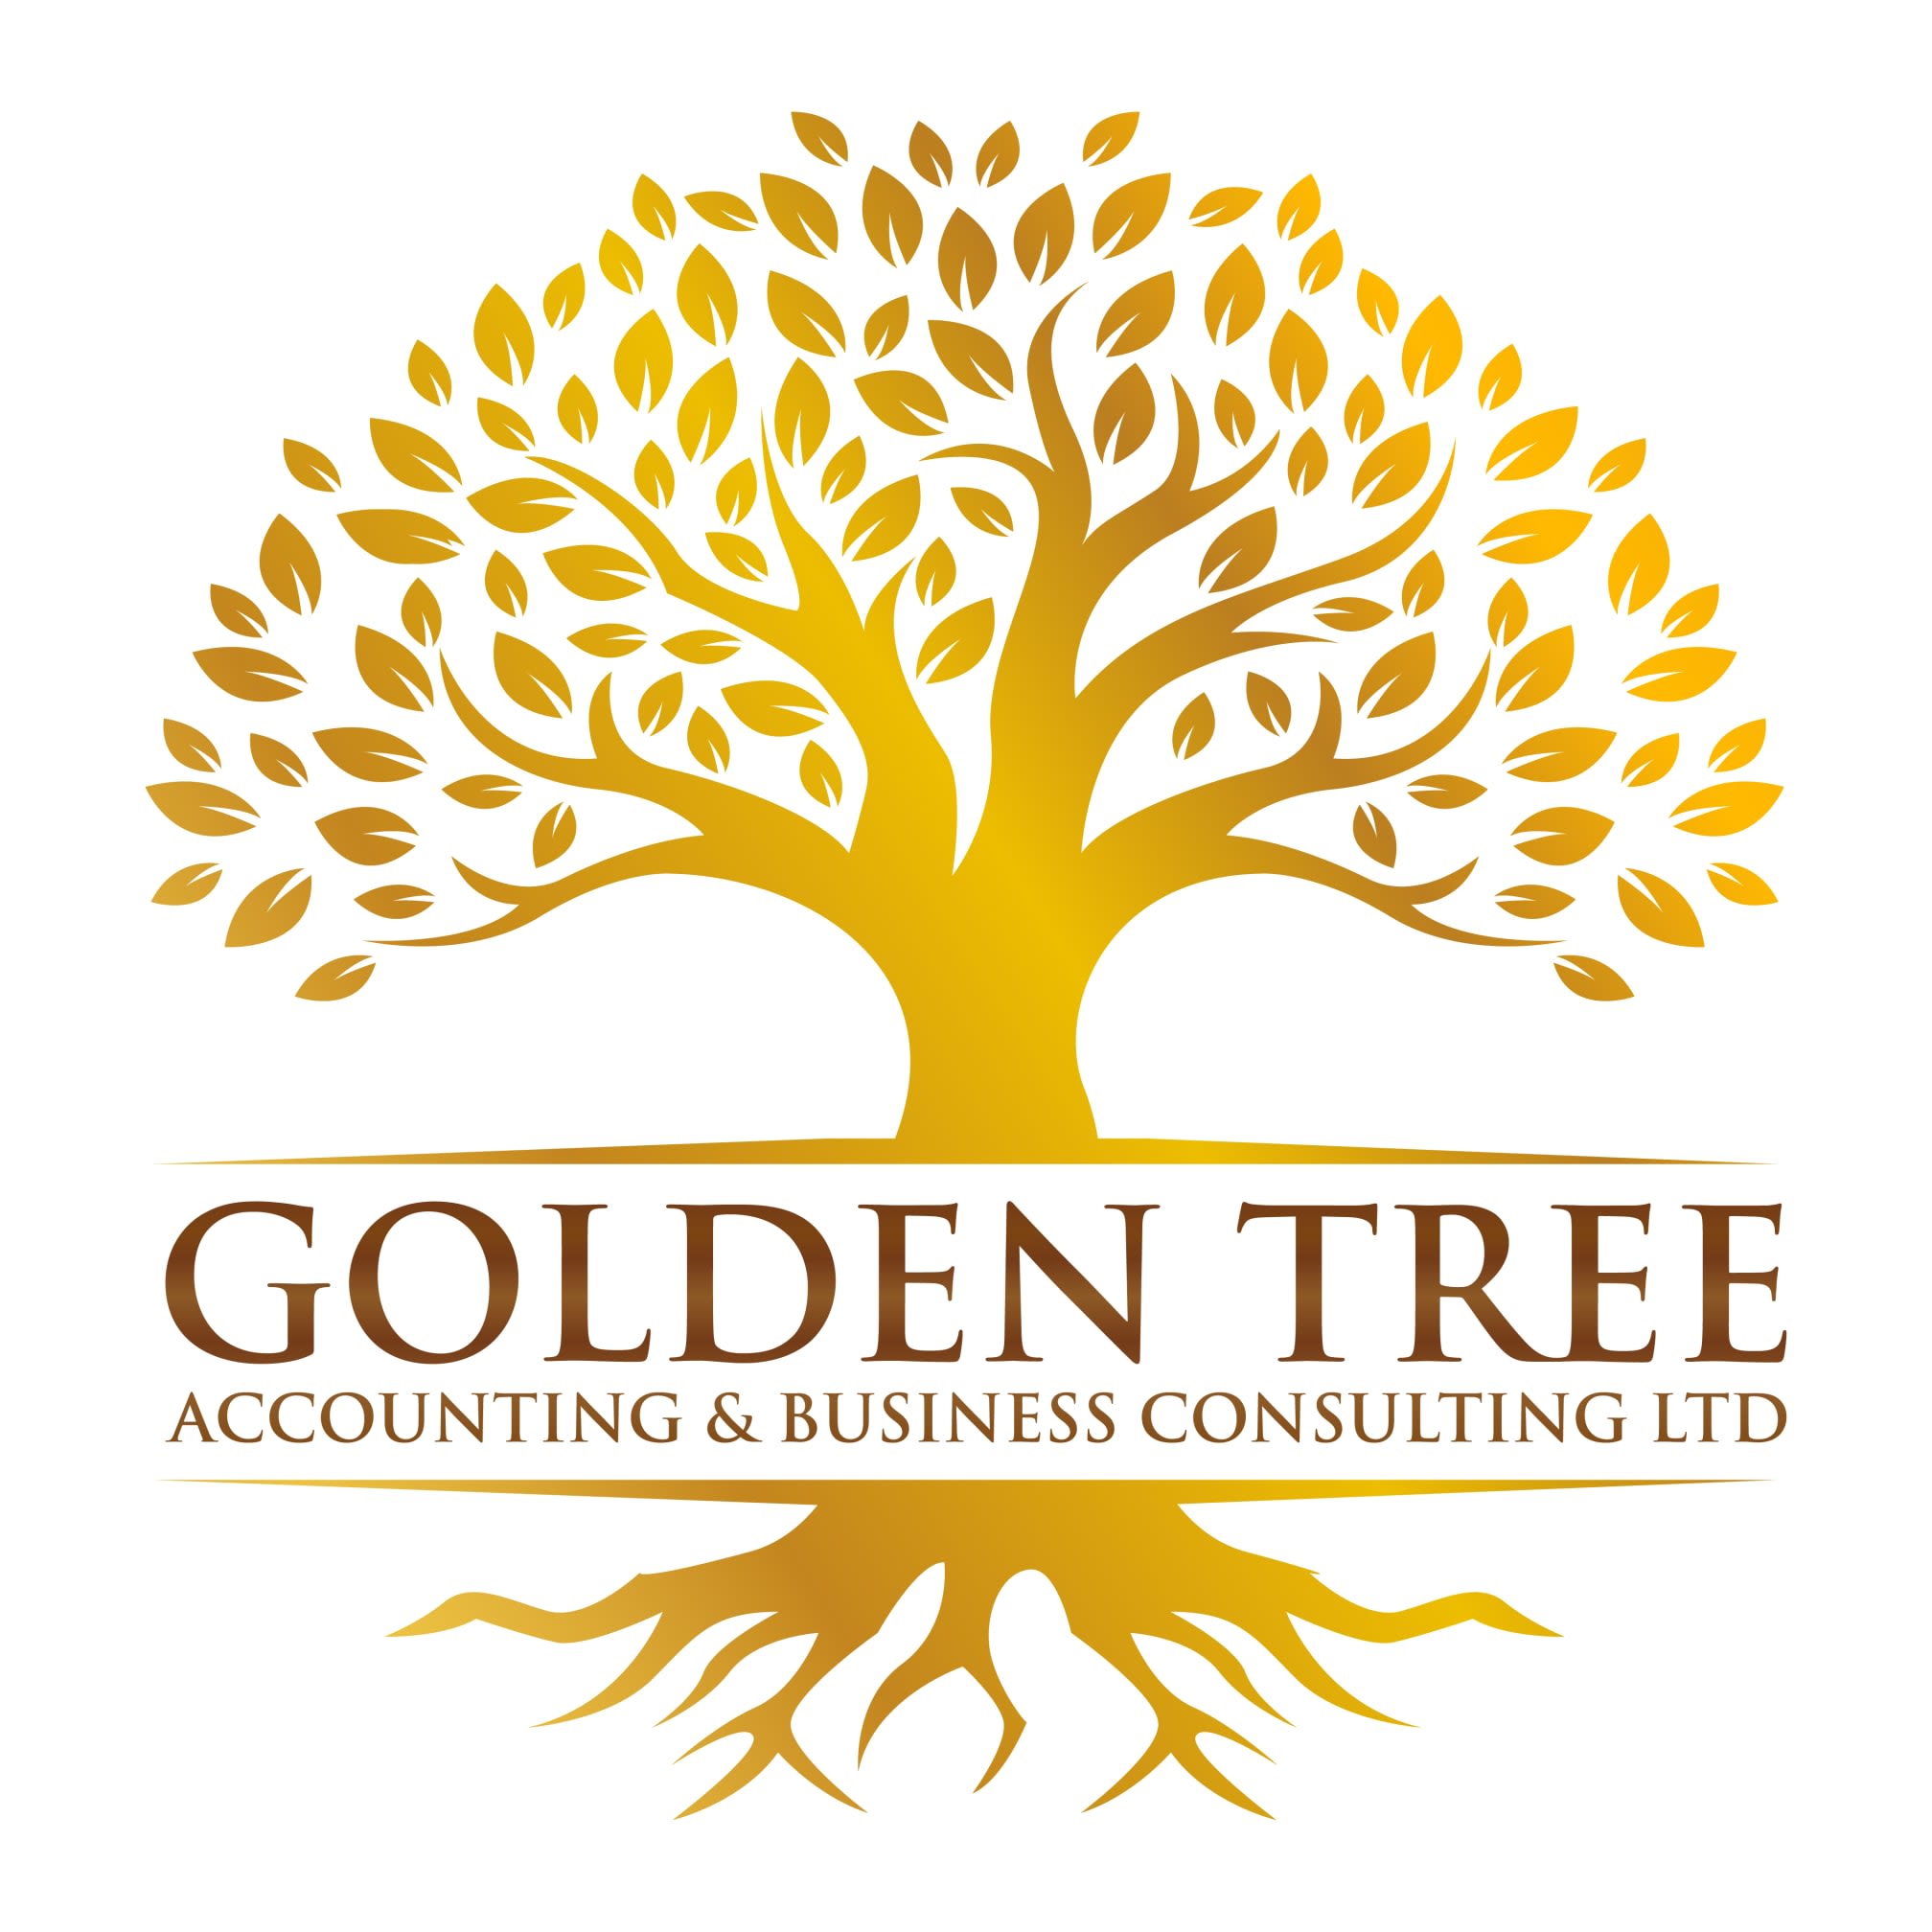 Golden Tree Accounting and Business Consulting Ltd Logo